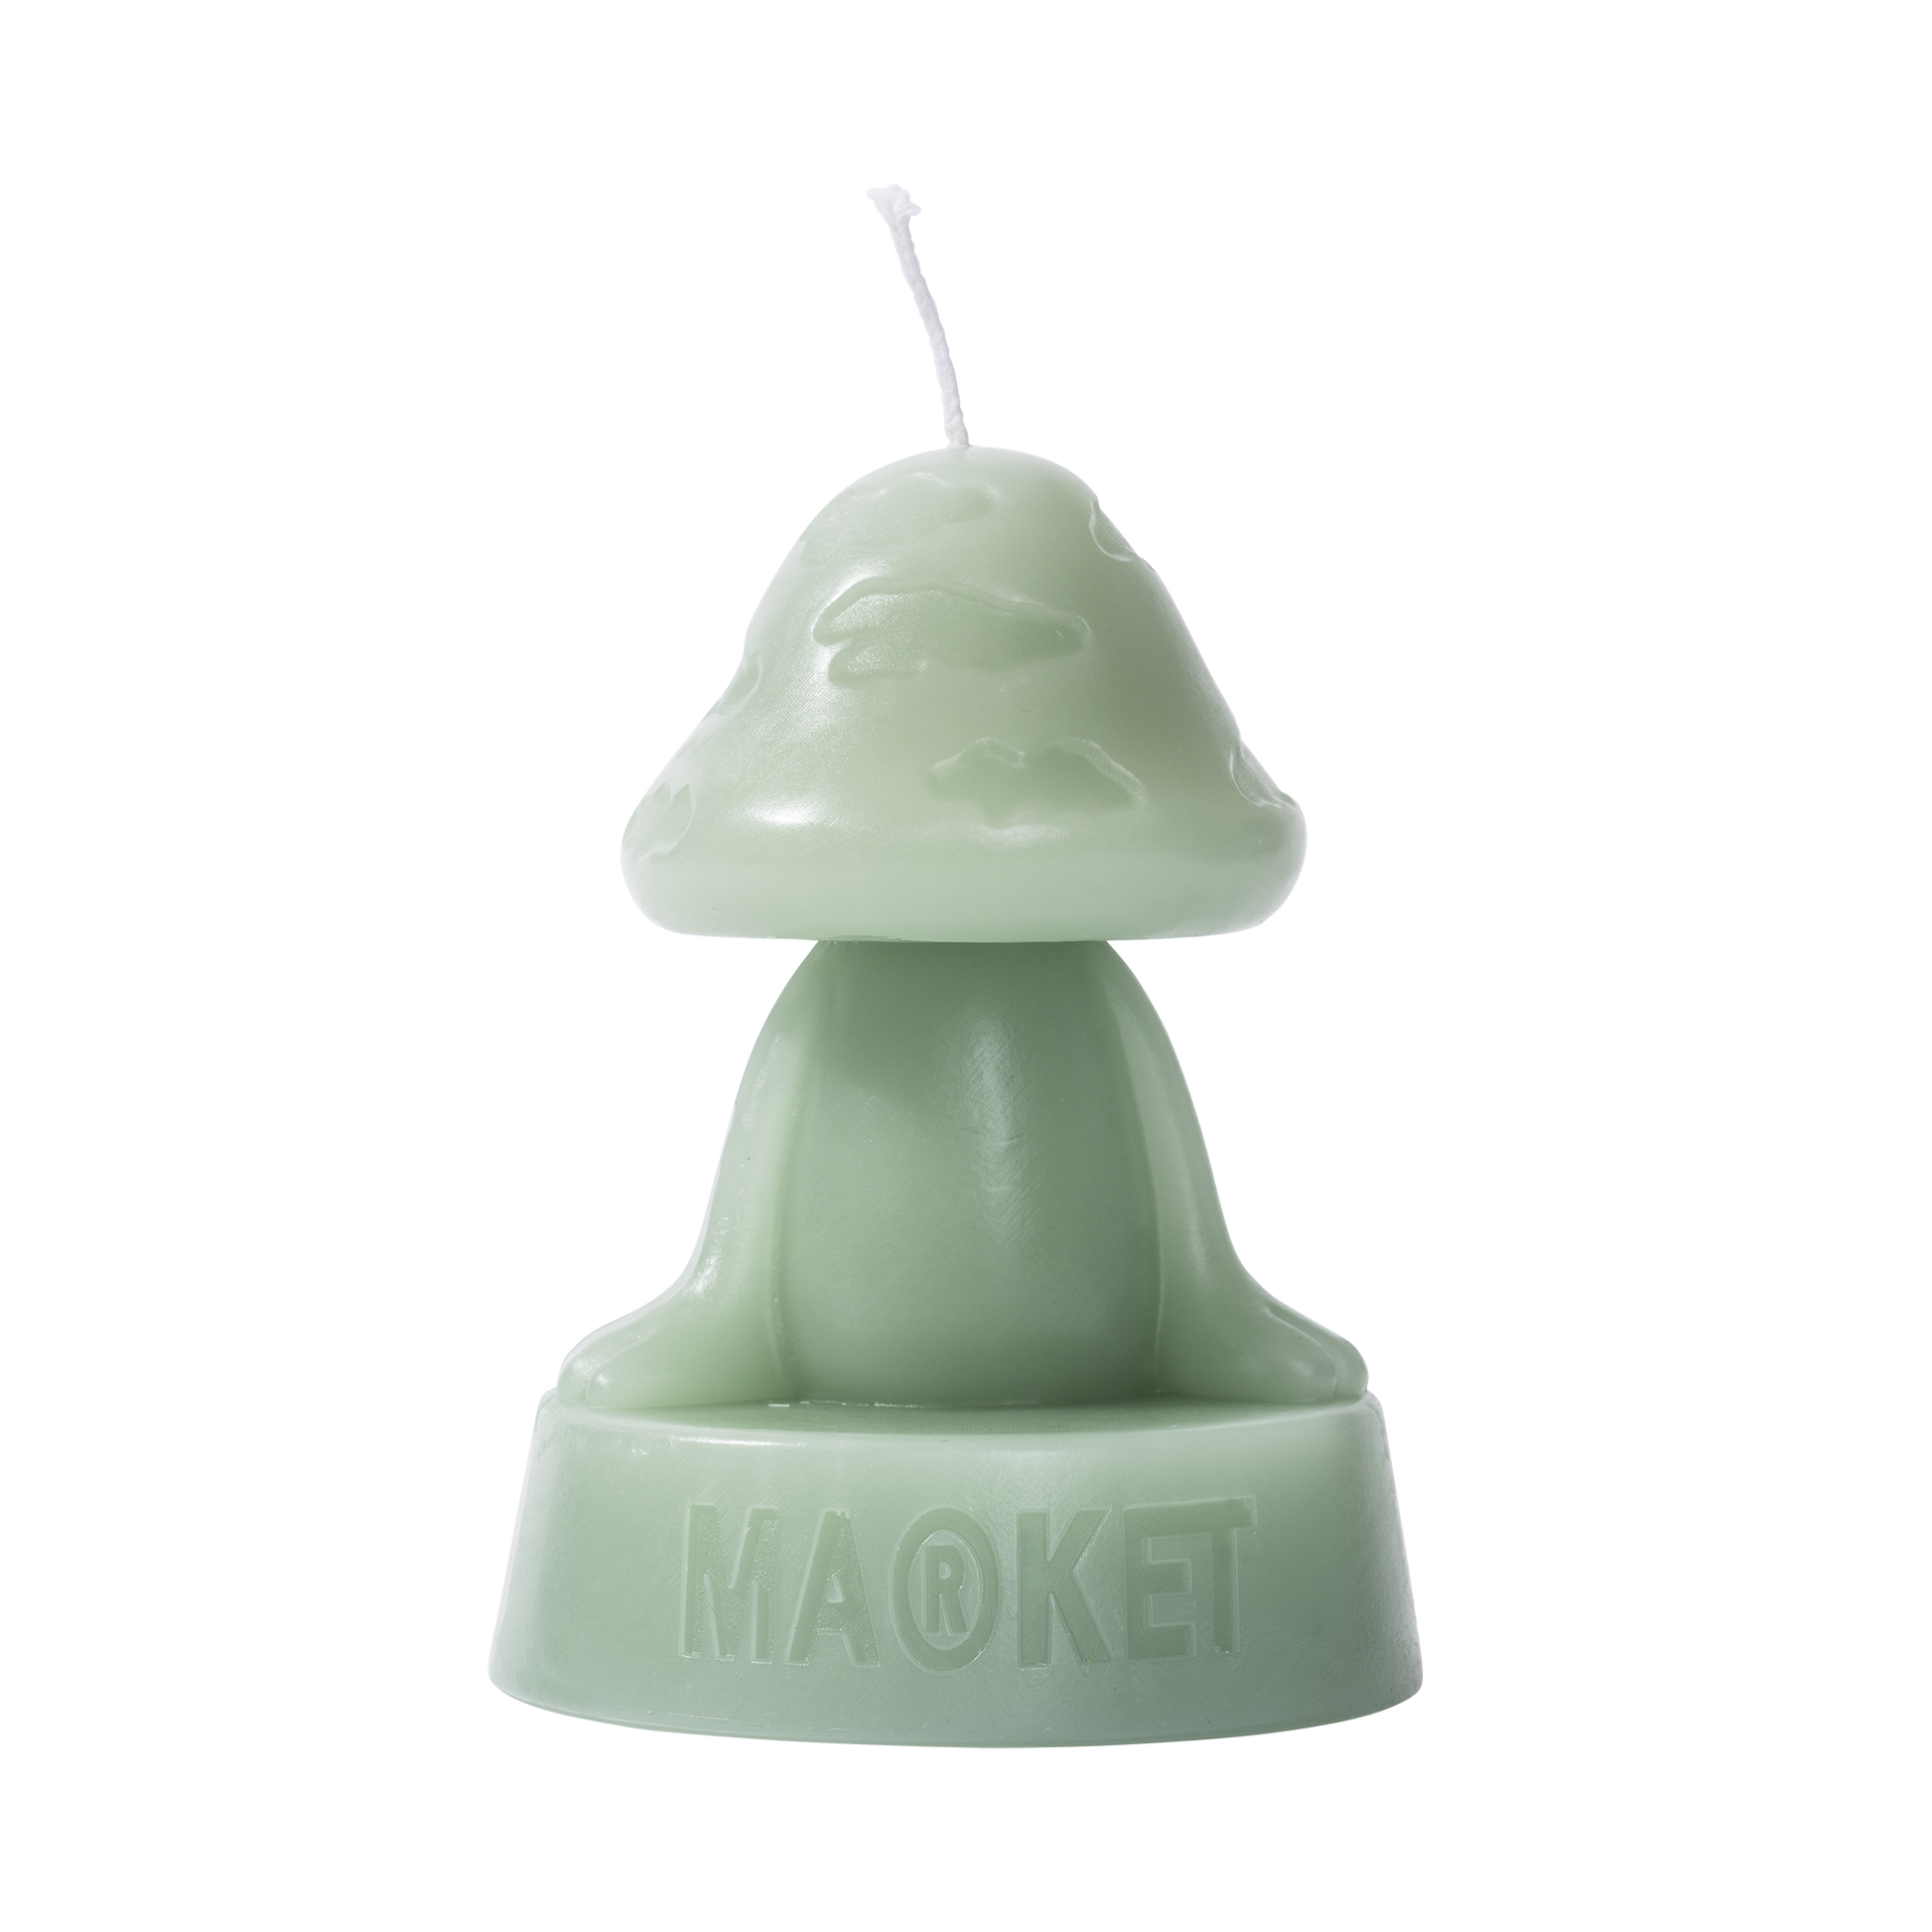 MARKET clothing brand FANTASY FARM CHARACTER MOLD CANDLE. Find more homegoods and graphic tees at MarketStudios.com. Formally Chinatown Market. 